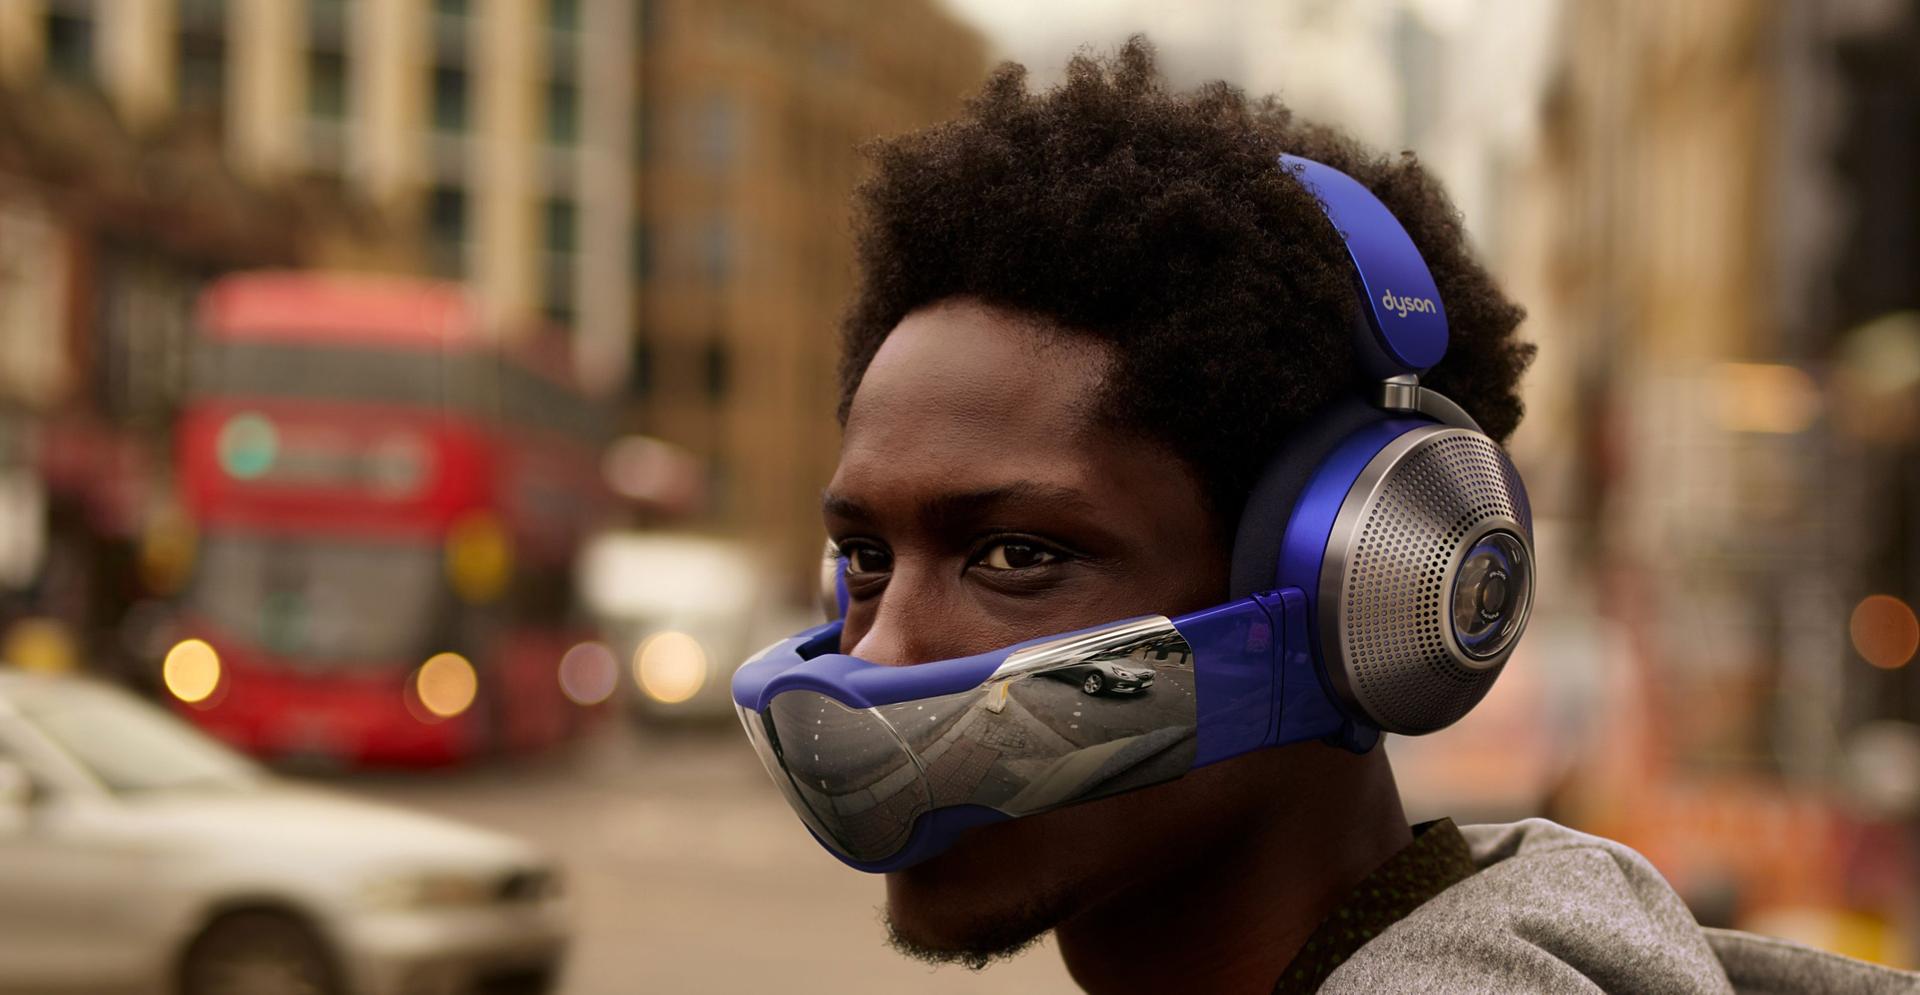 Man wearing Dyson Zone headphones with air purification. Visor is attached.